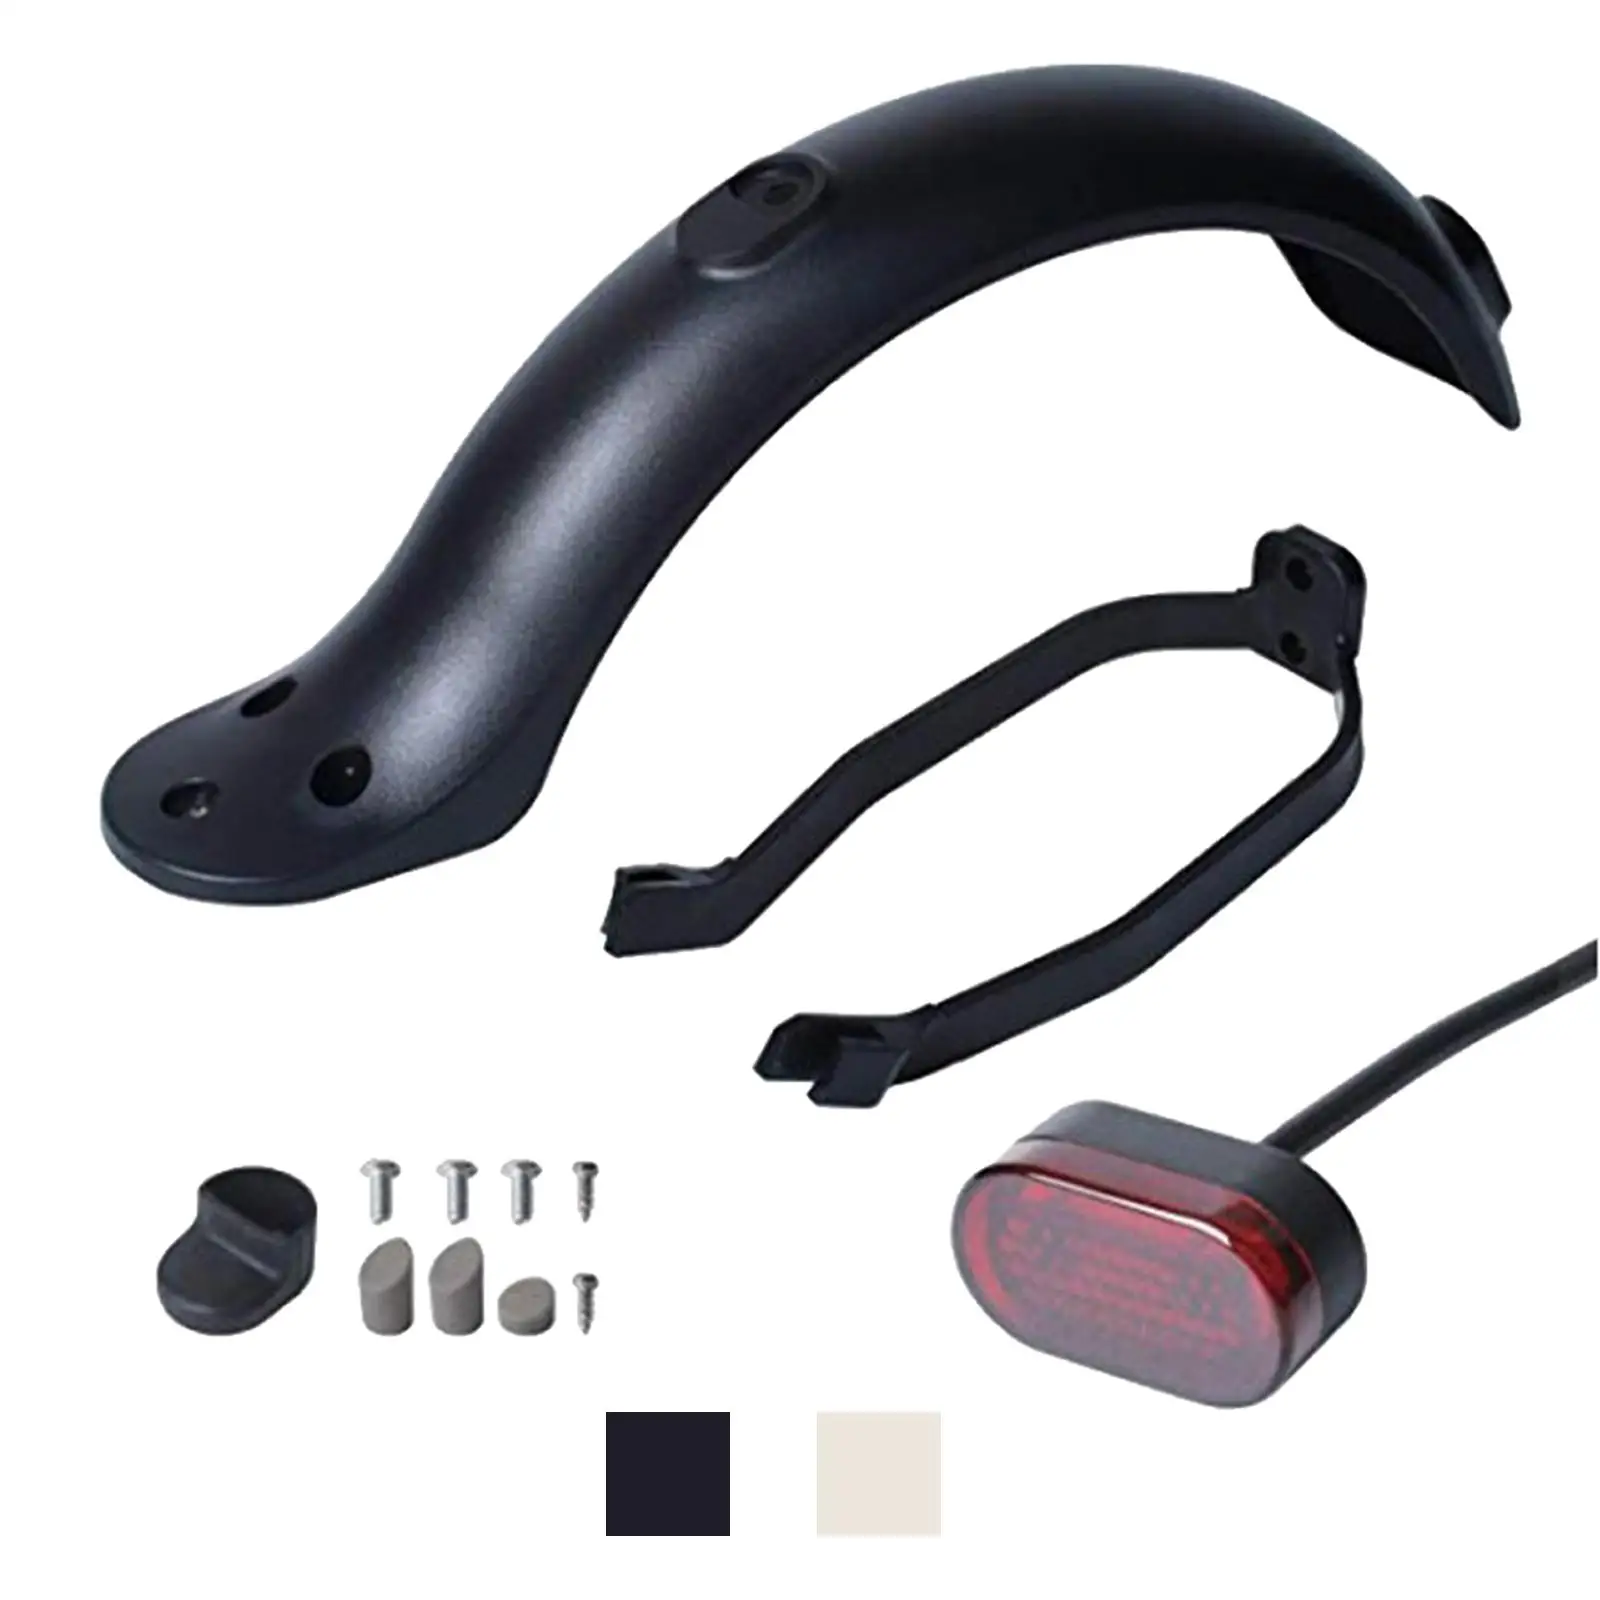  SilicHook Cover for Electric Scooters Skateboard Back Mudguard  Accessories